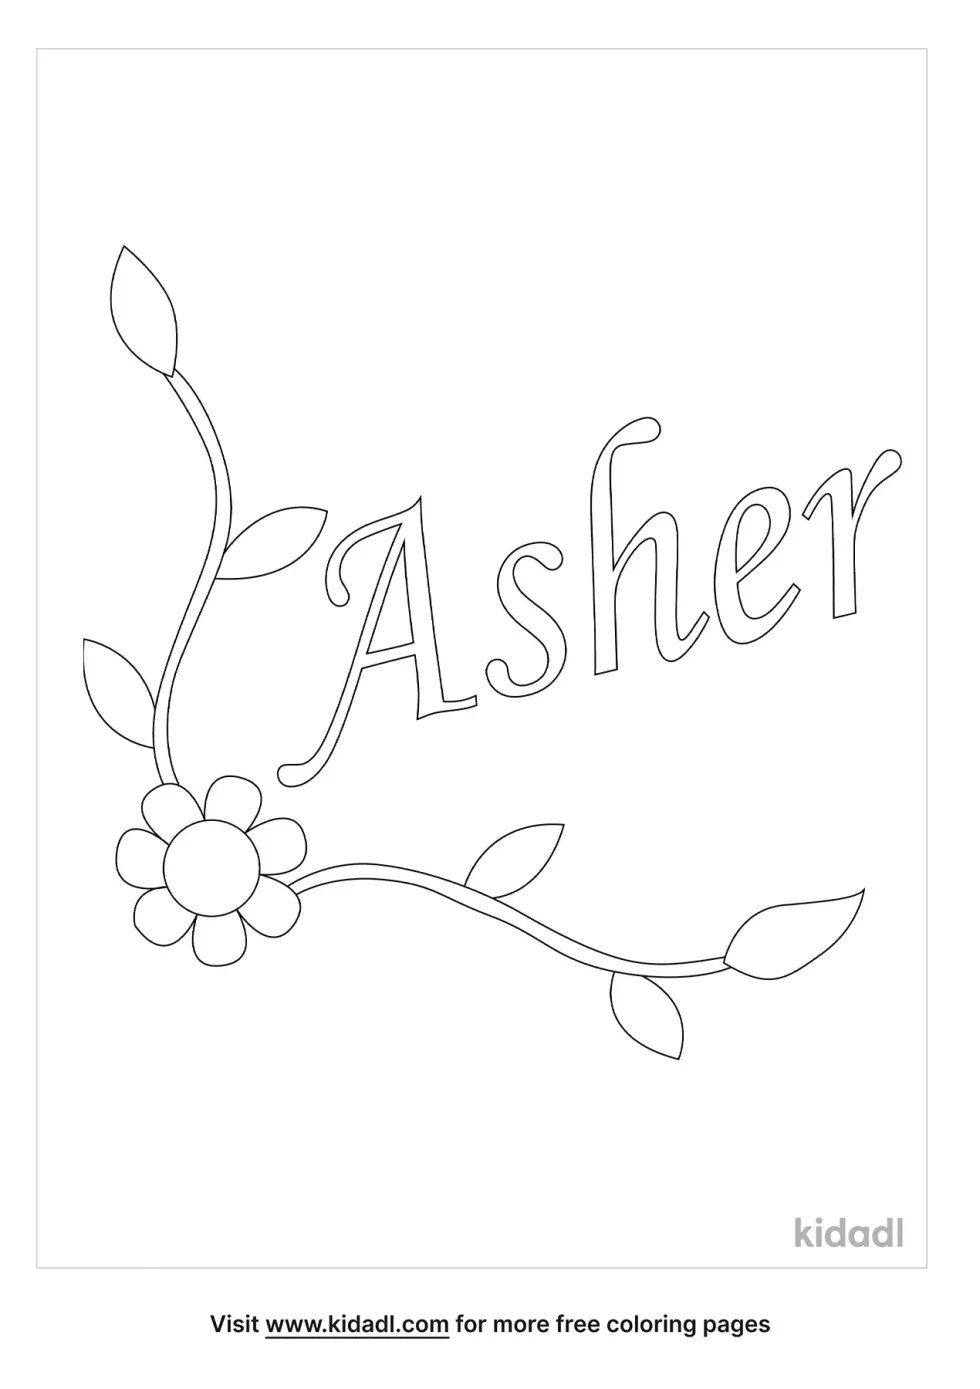 Asher Coloring Page